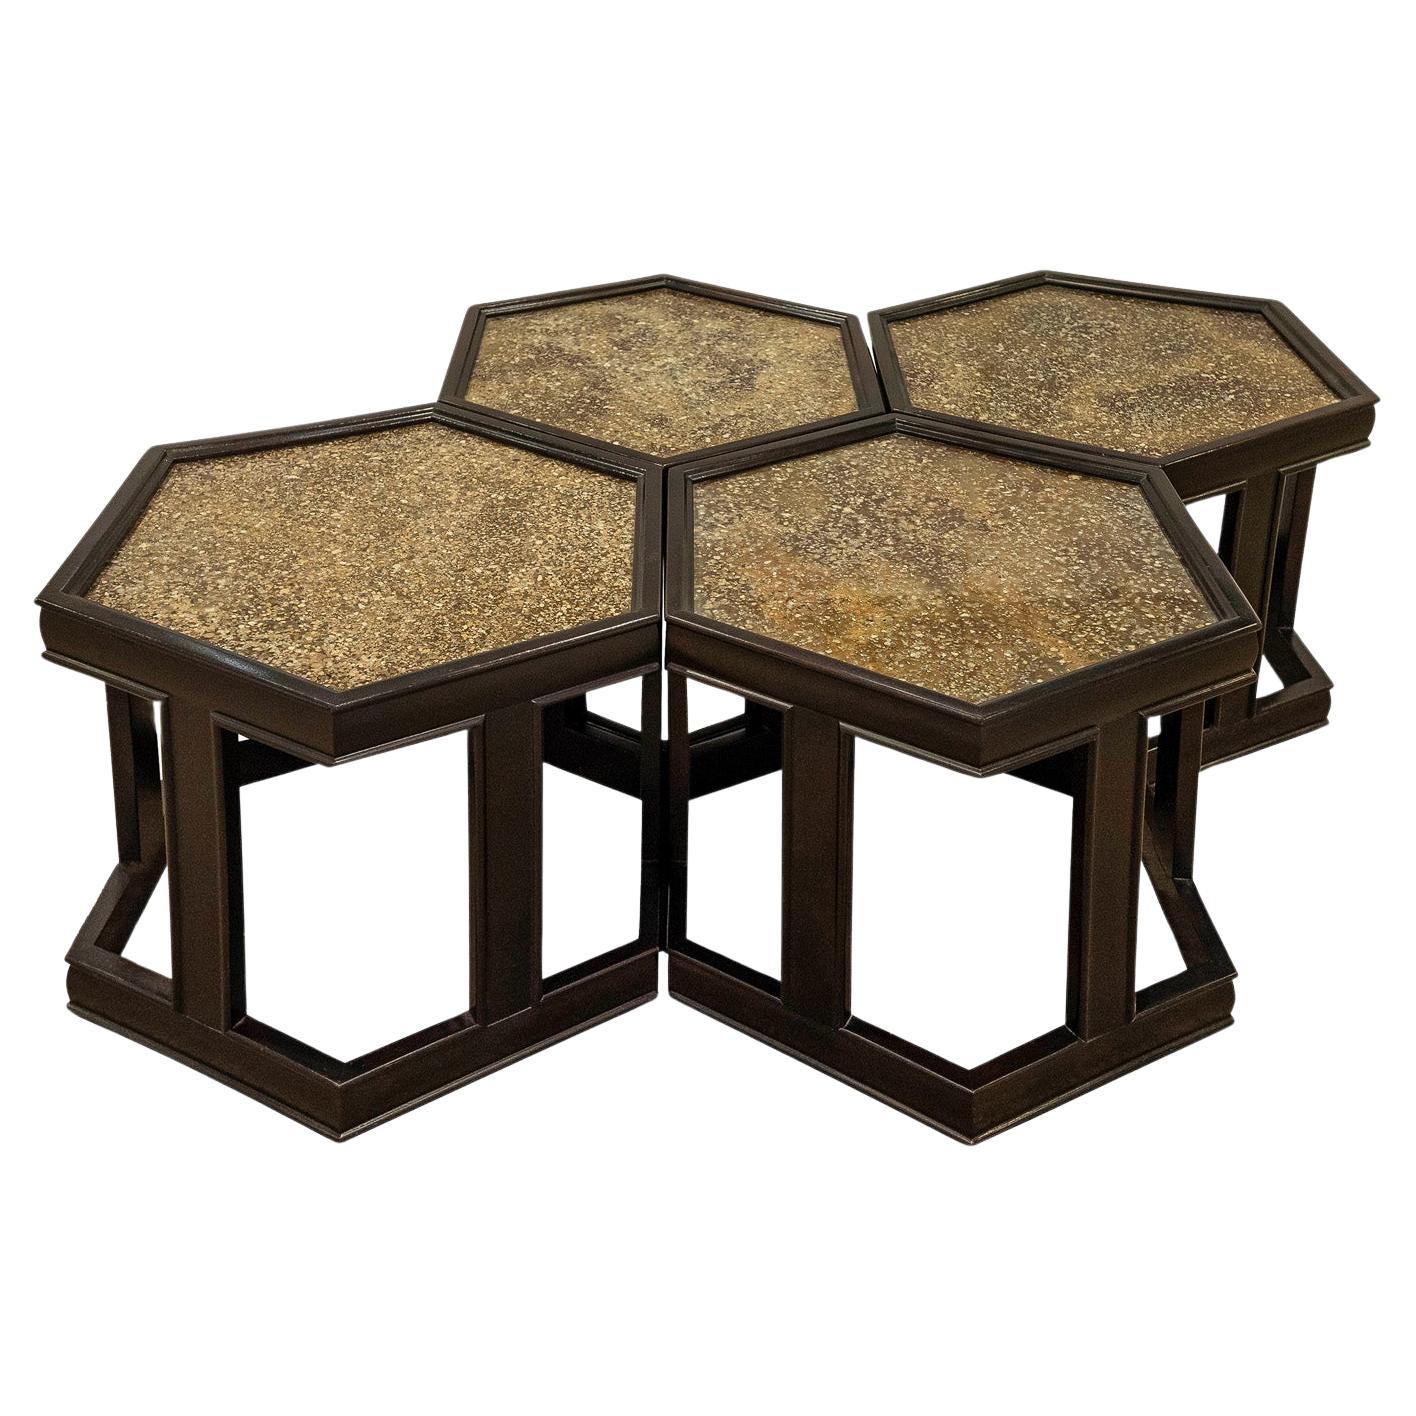 Brown Saltman Occasional Tables with Gold/Copper Resin Tops 1960s (Signed) For Sale